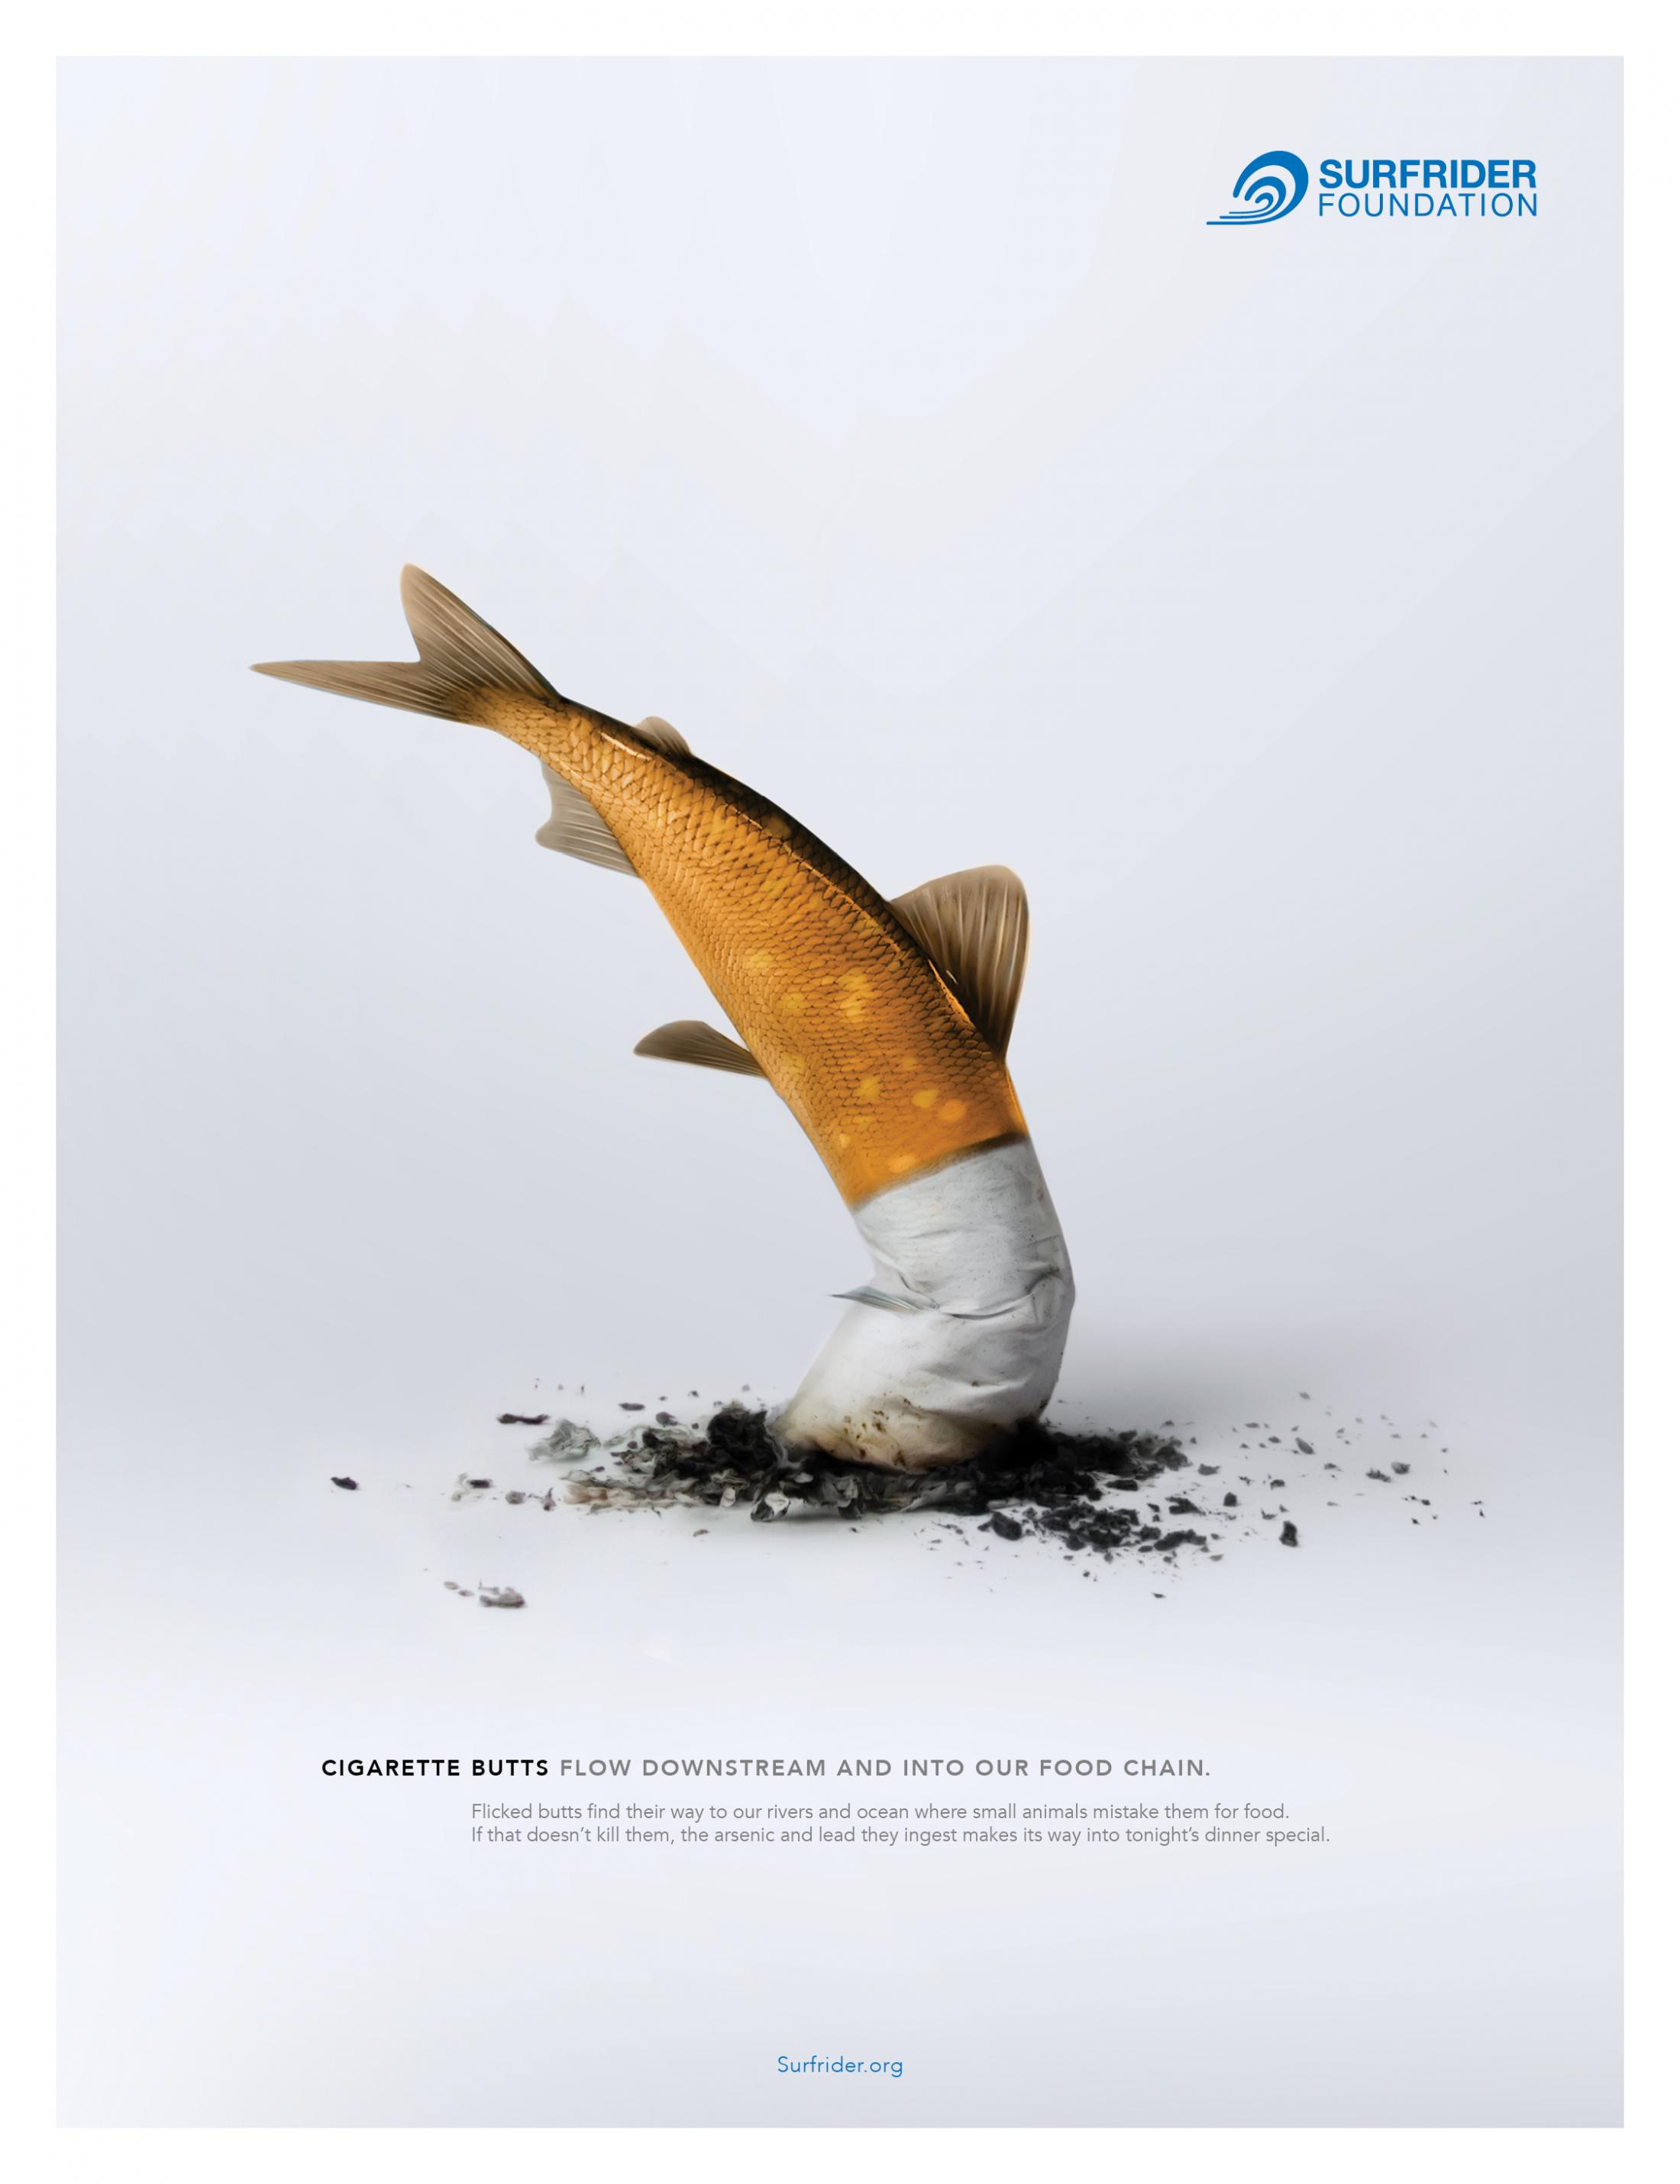 cigarette.butt-as-fish-sawe-water-campaign